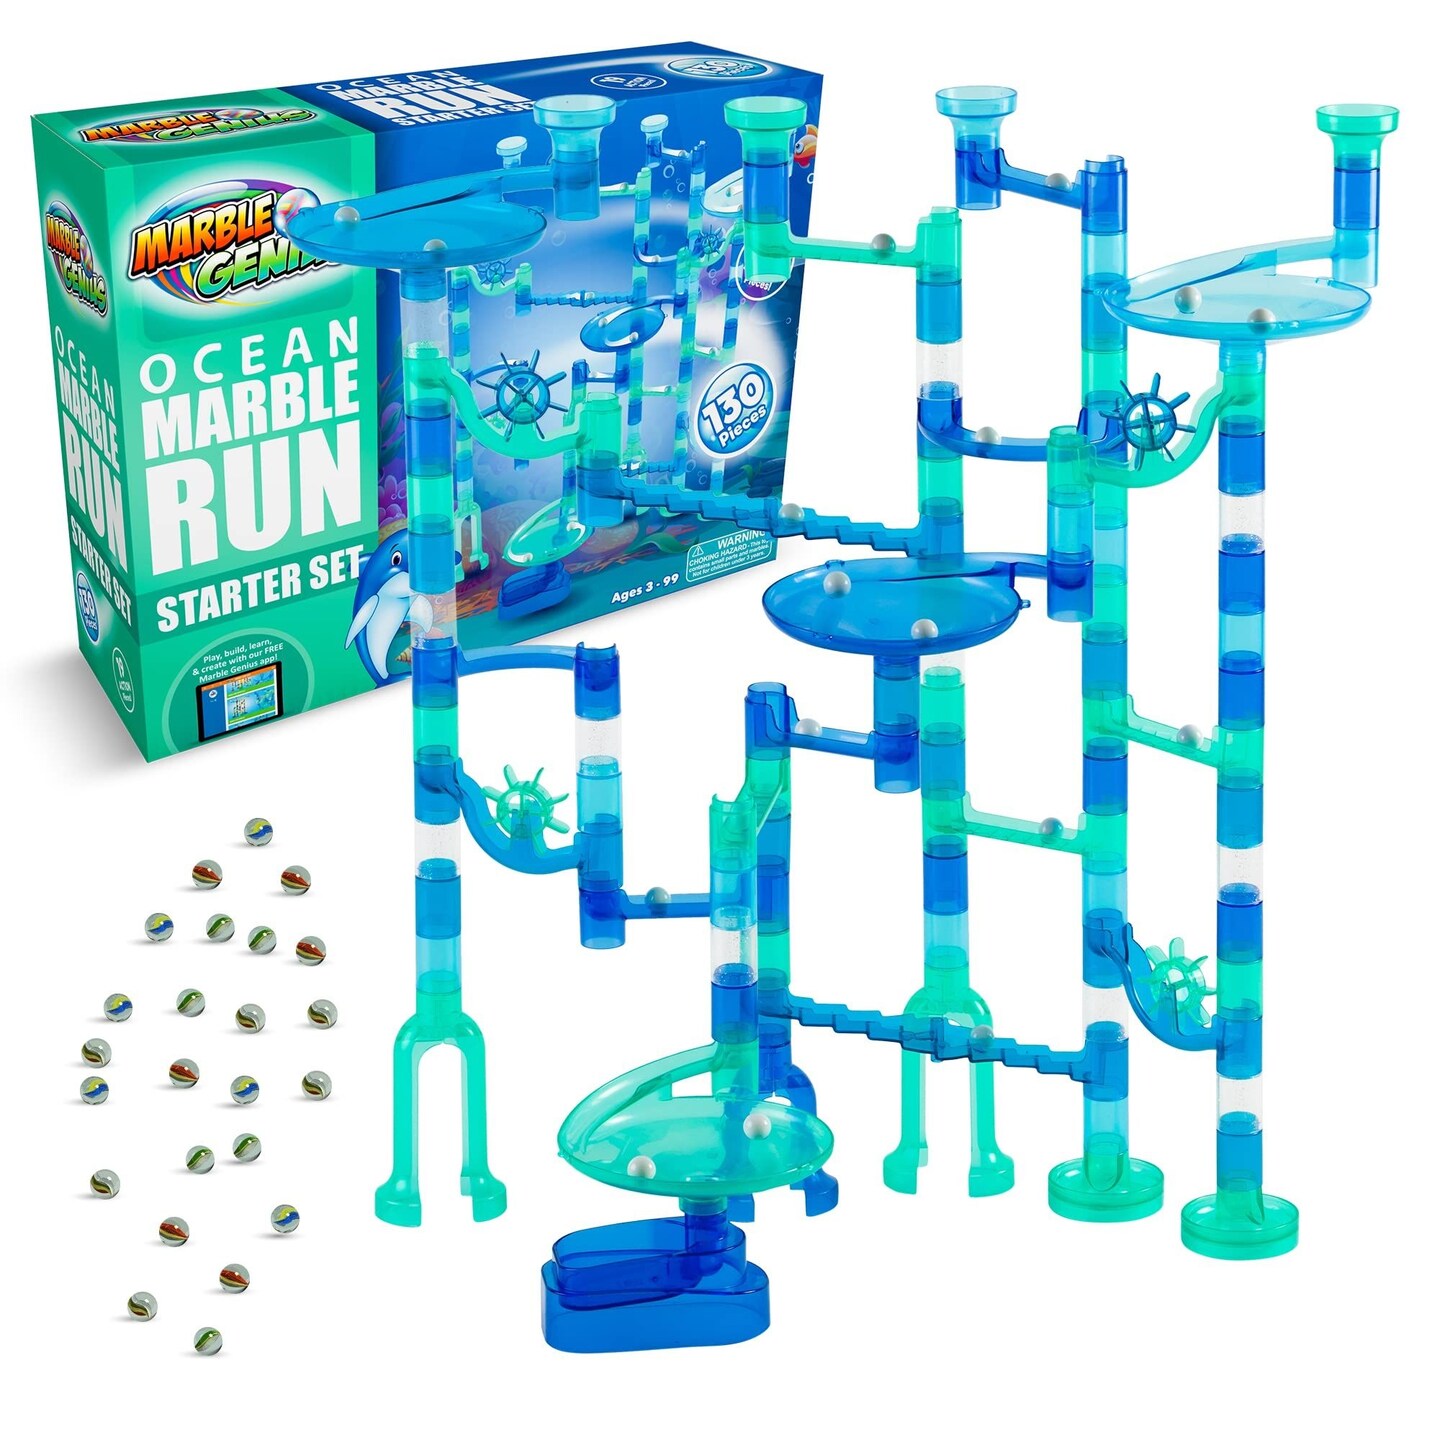 Marble Genius Marble Run Starter Set STEM Toy for Kids Ages 4 - 12 - 130 Complete Pieces (80 Translucent Marbulous Pieces and 50 Glass Marbles), Construction Building Block Toys, Theme (Ocean),